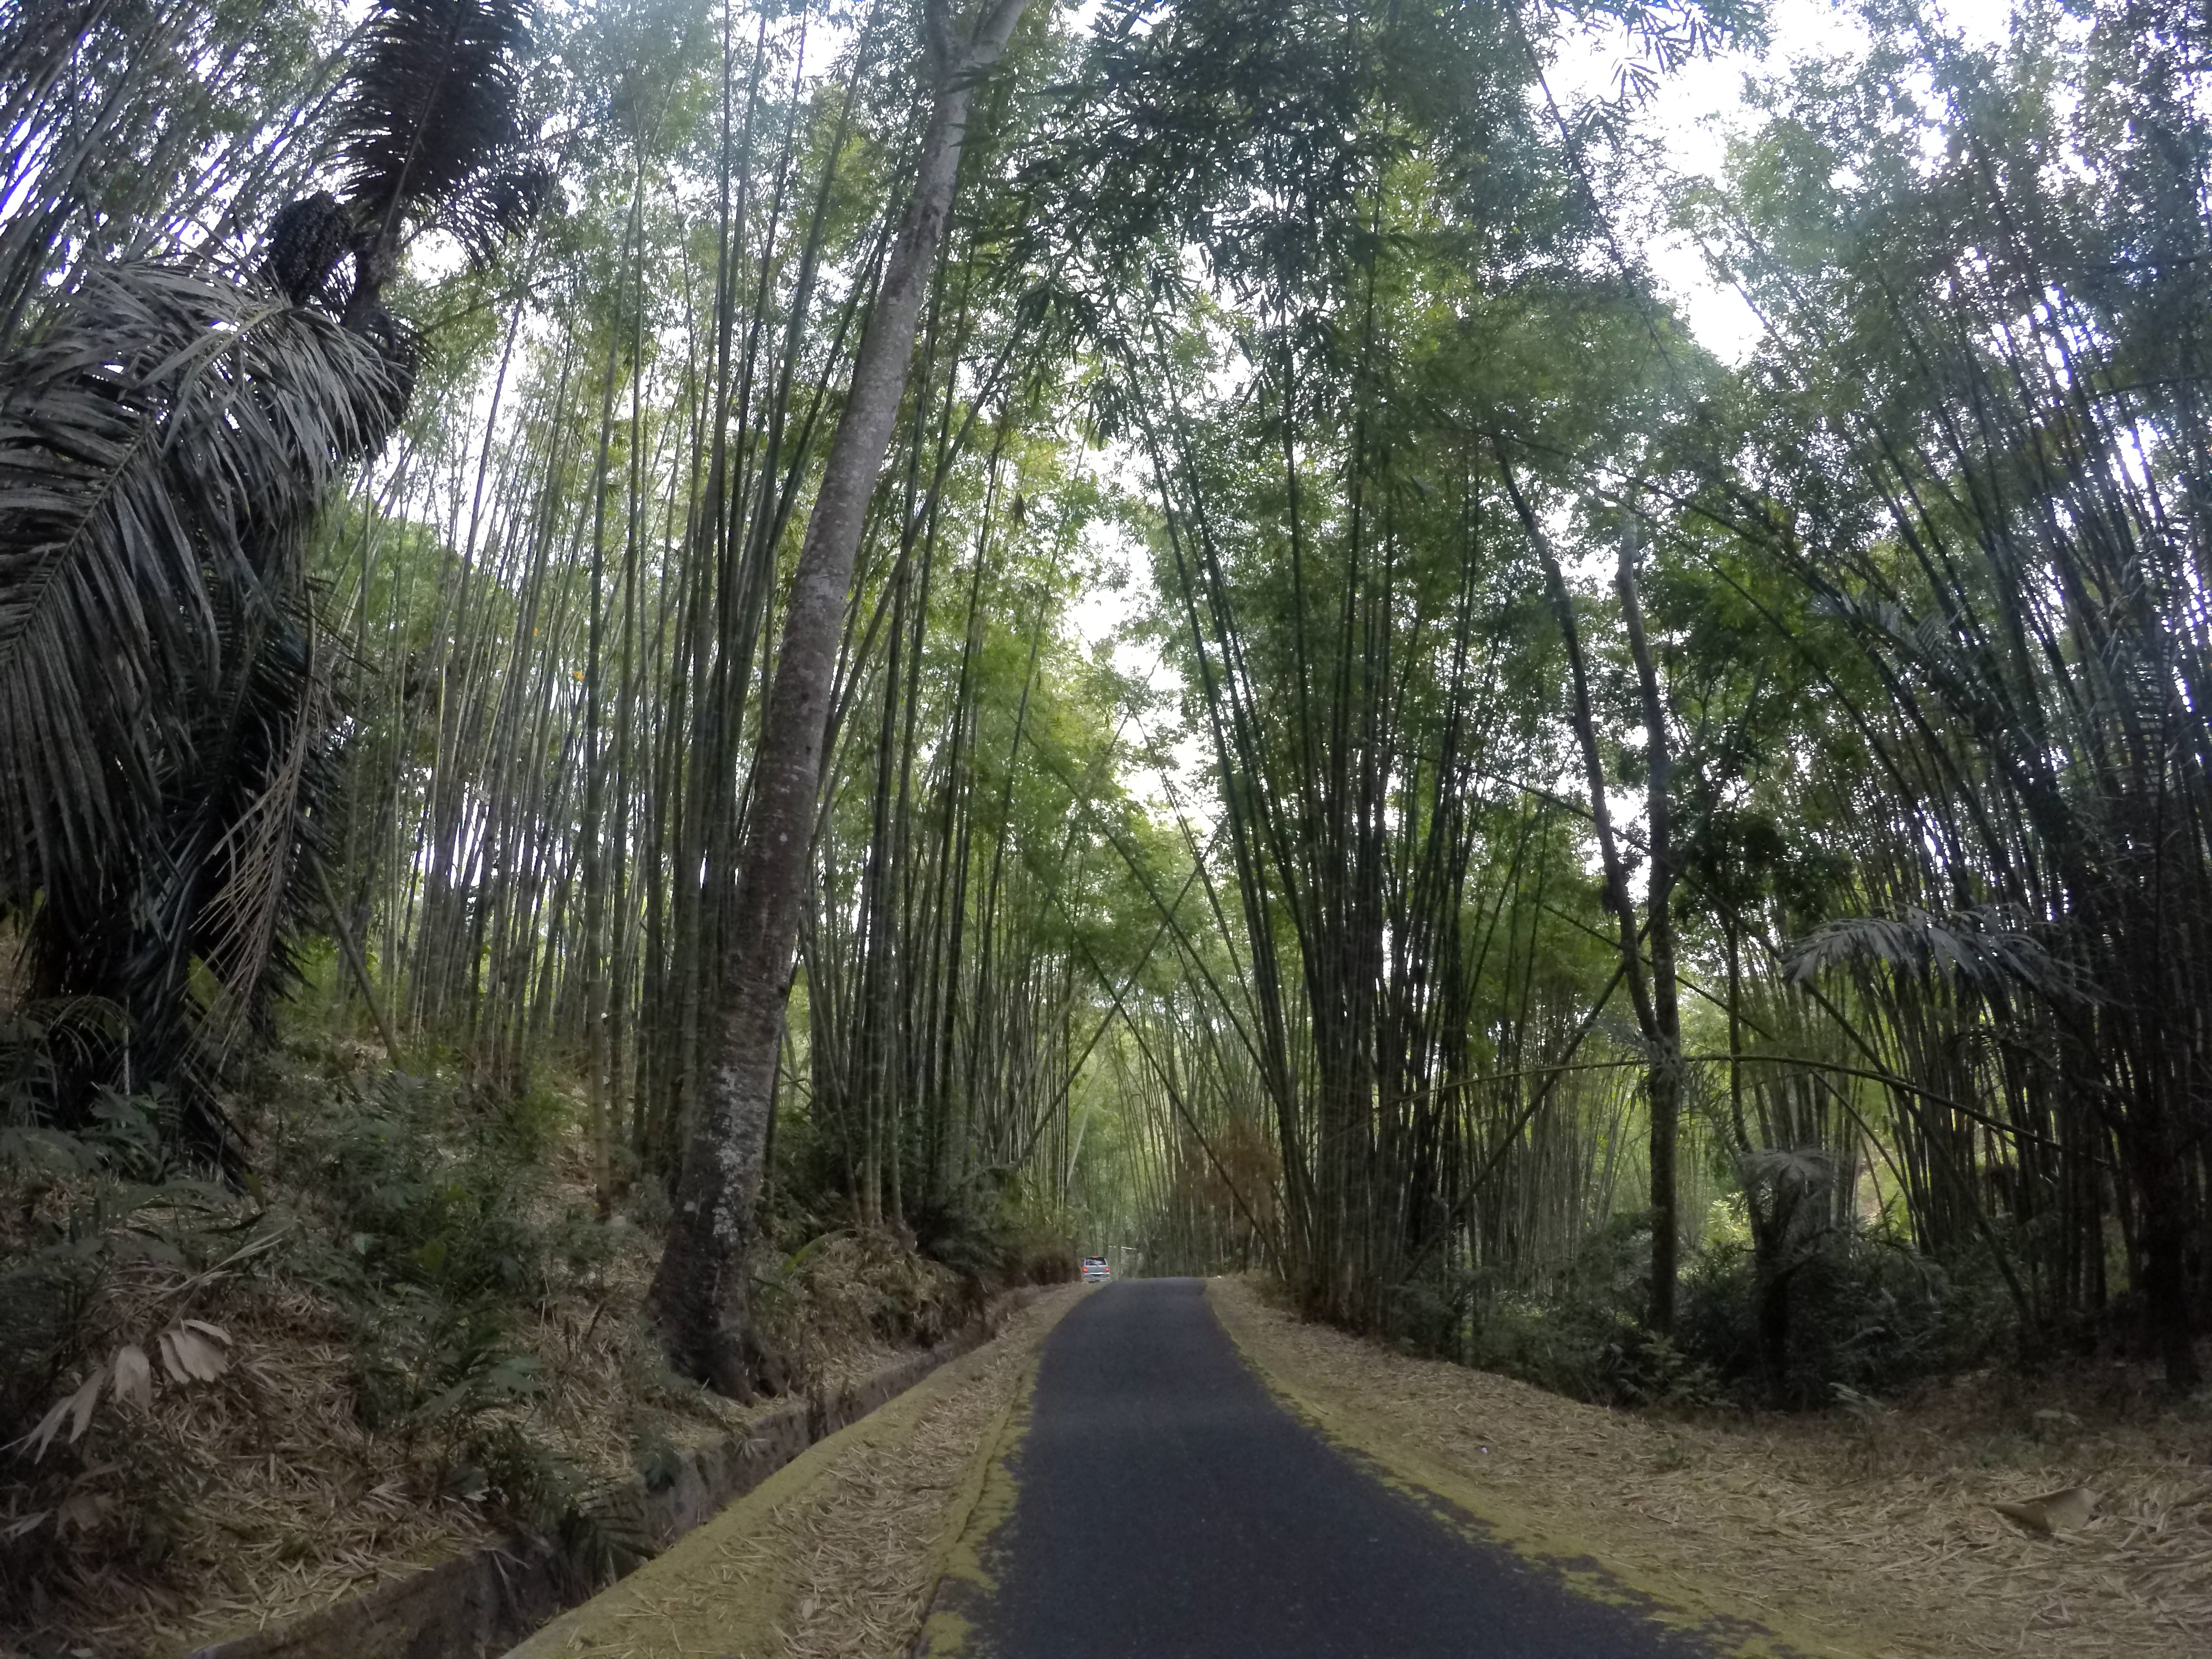 A road running through the middle of a forest of tall bamboo trees